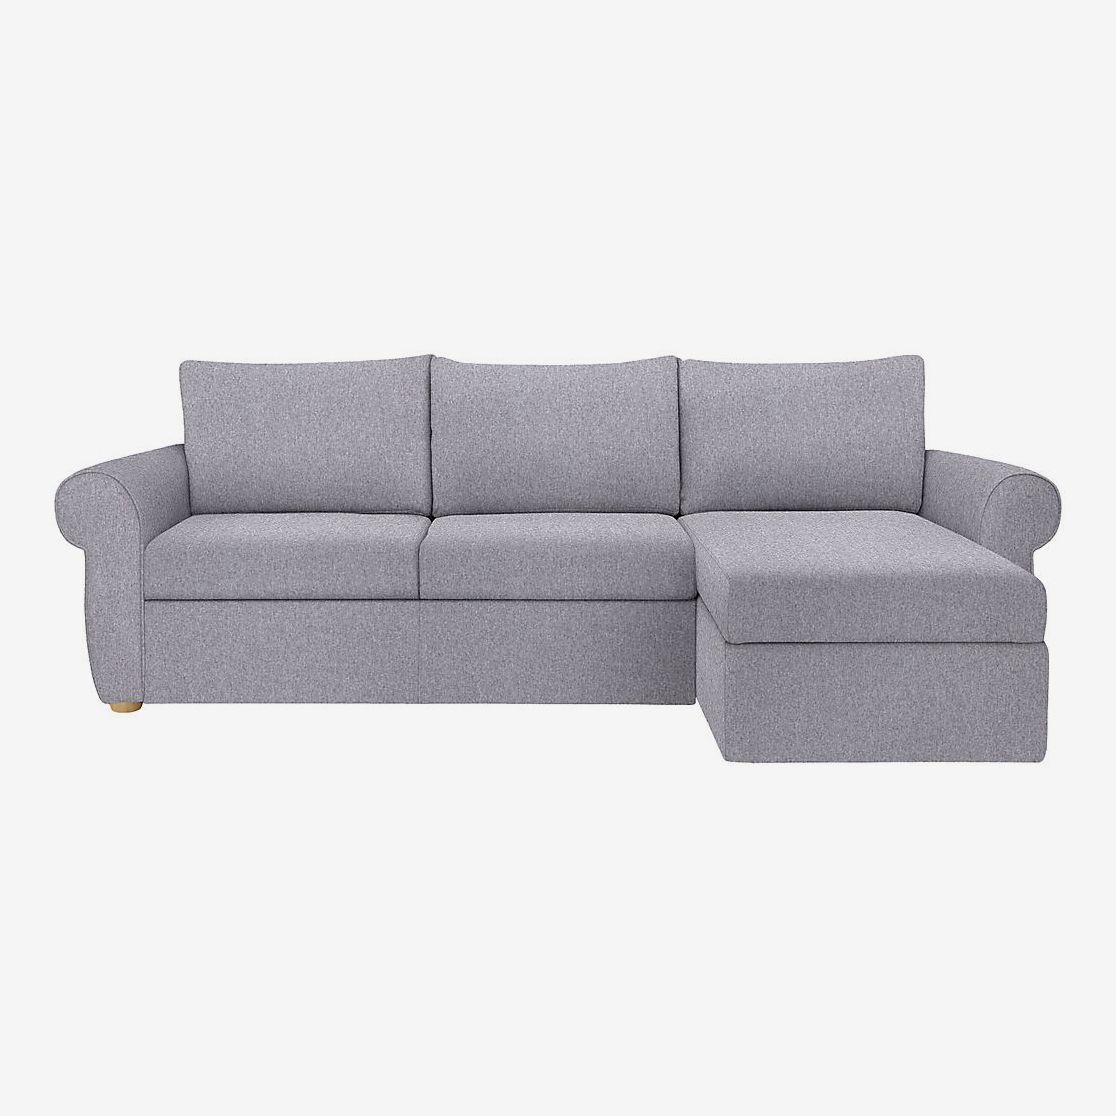 Best Sofa Beds 2020 The Strategist, Most Comfortable Sofa Bed Uk 2021